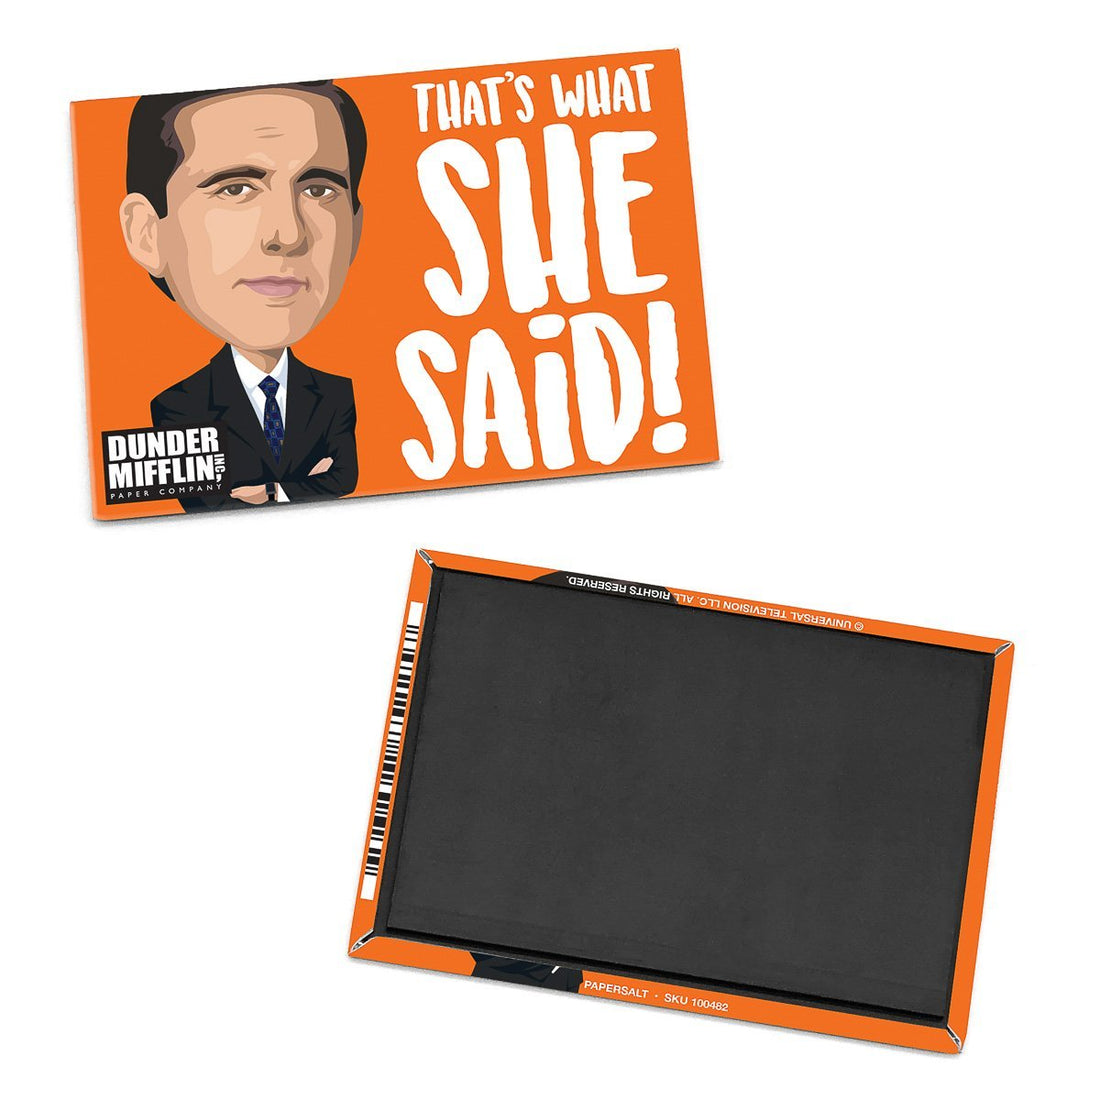 Michael Scott "That's What She Said" Magnet - Official The Office Merchandise